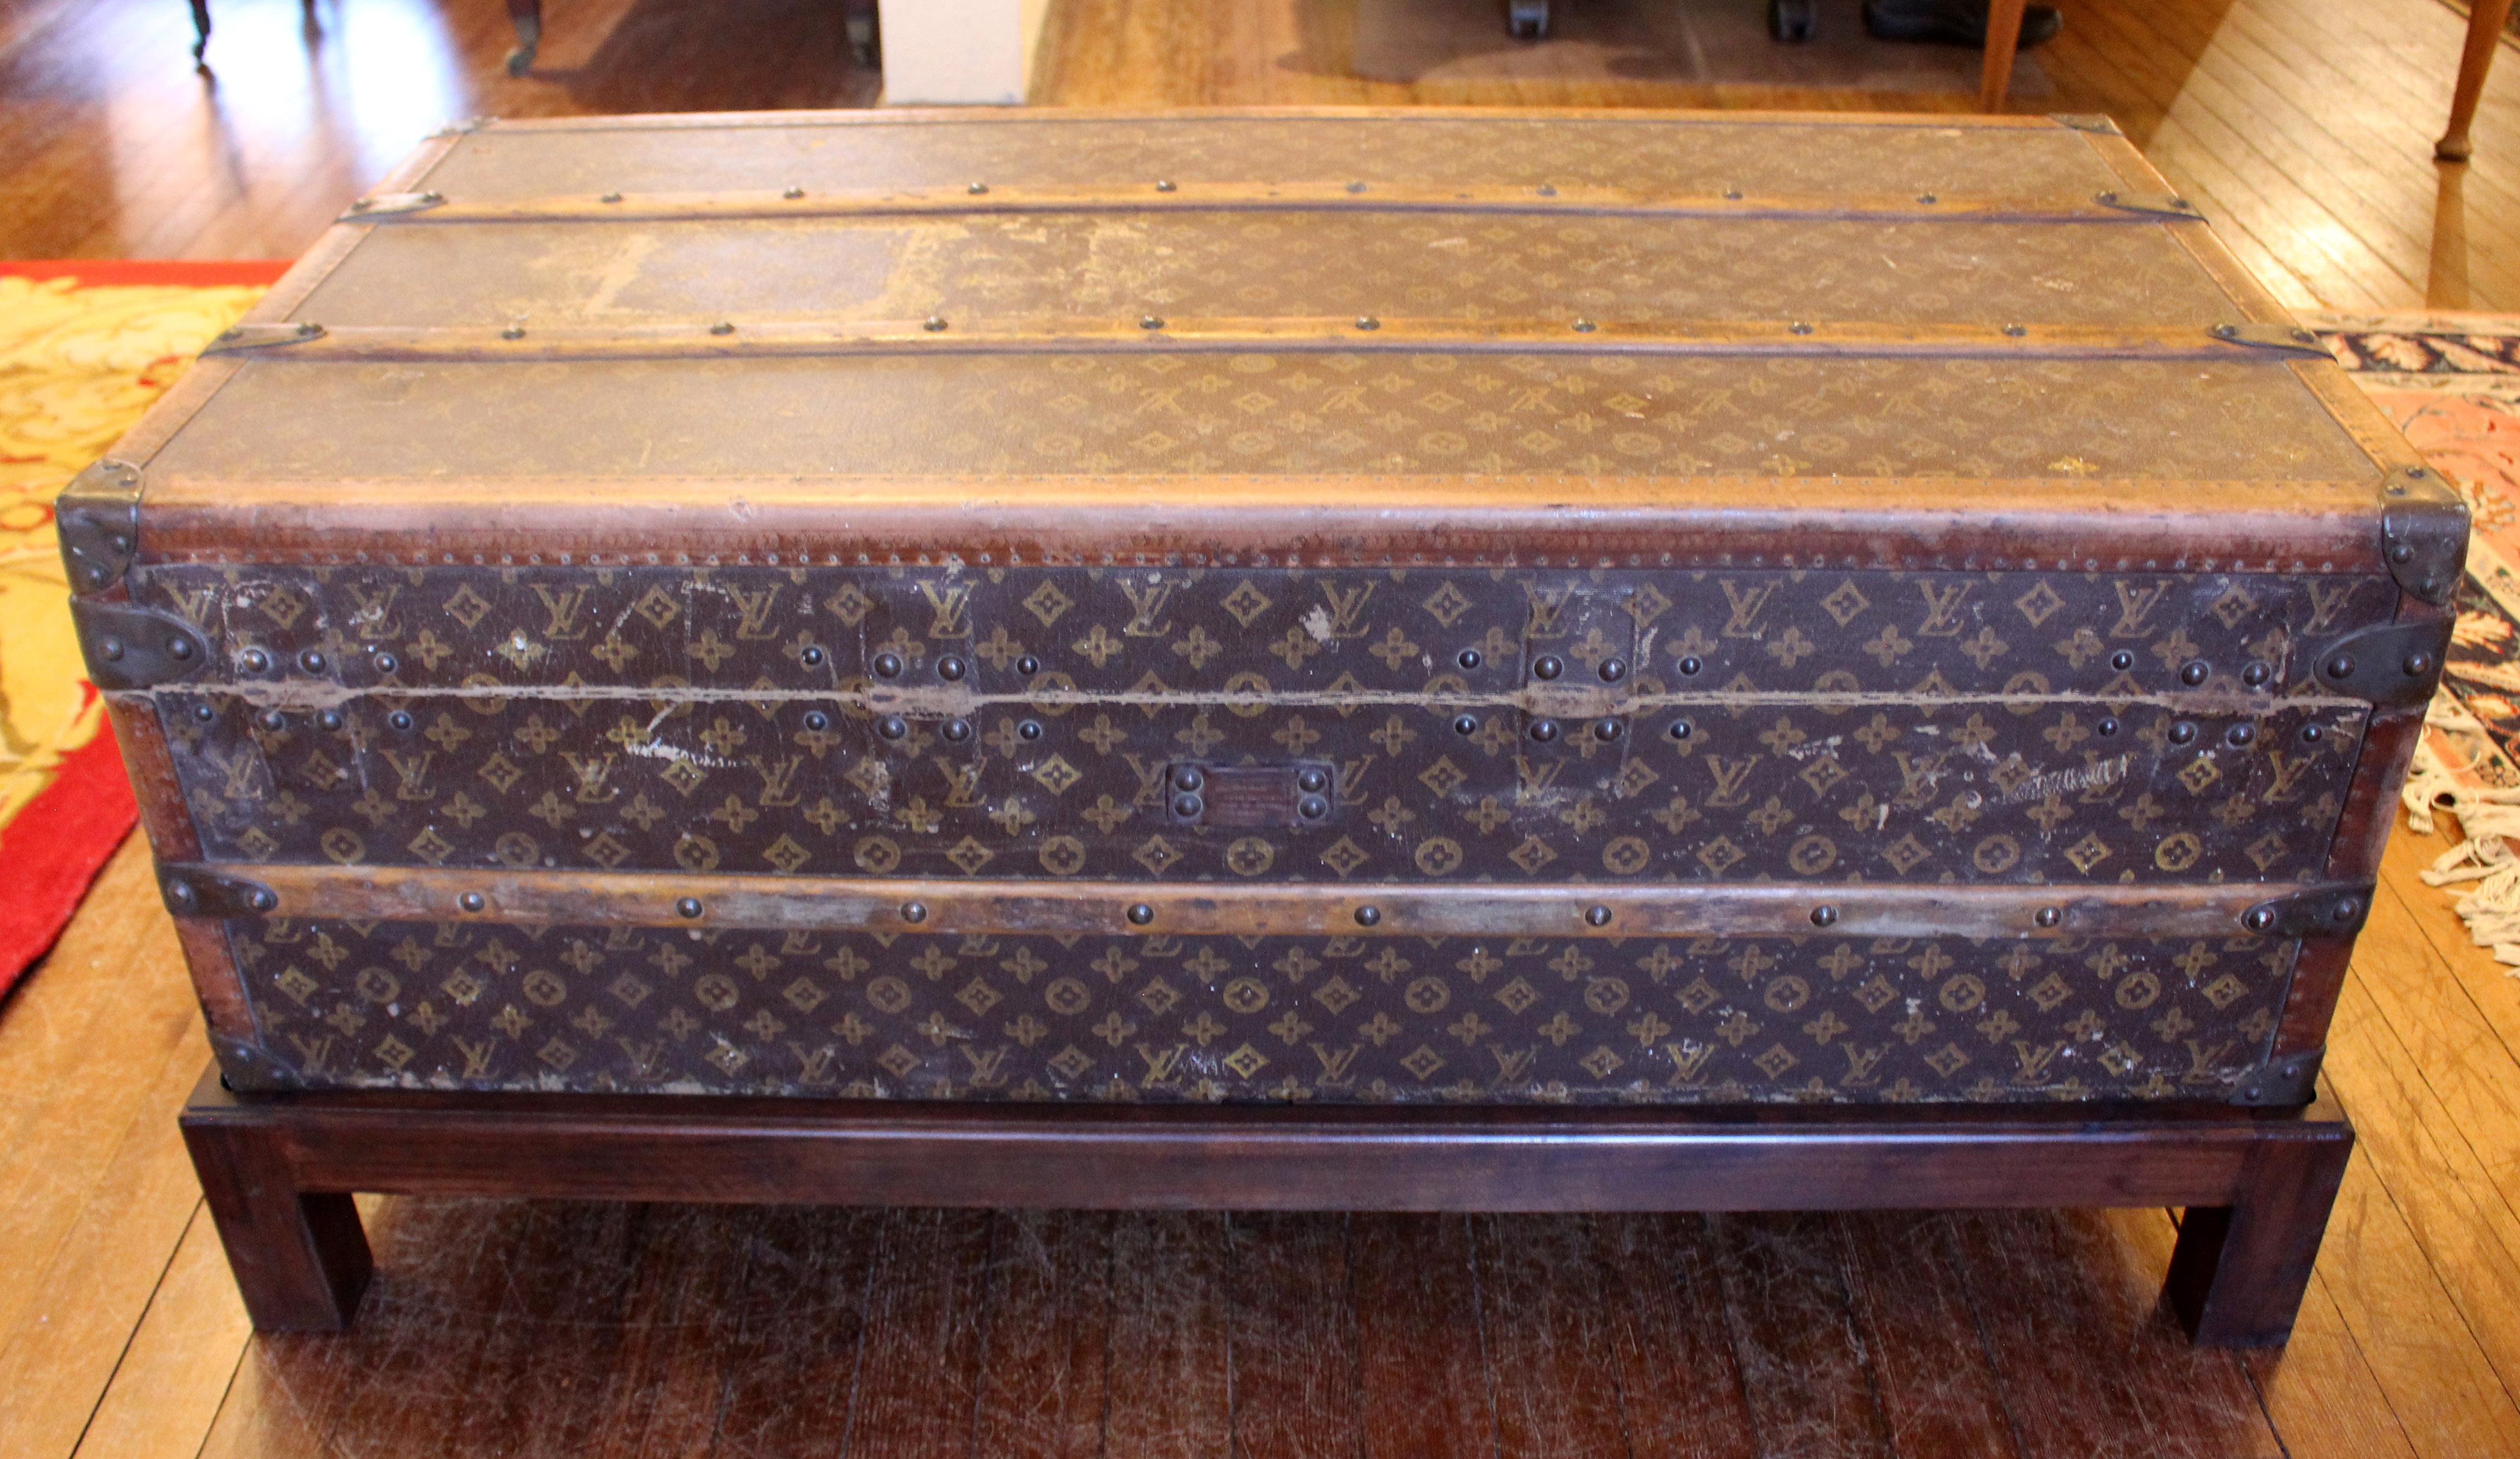 Early 20th century Louis Vuitton travel trunk now on custom made coffee table height stand. Side handles and original casters. LV insignia pattern. Lacks interior tray, however, interior is in remarkable condition. Original labels: 